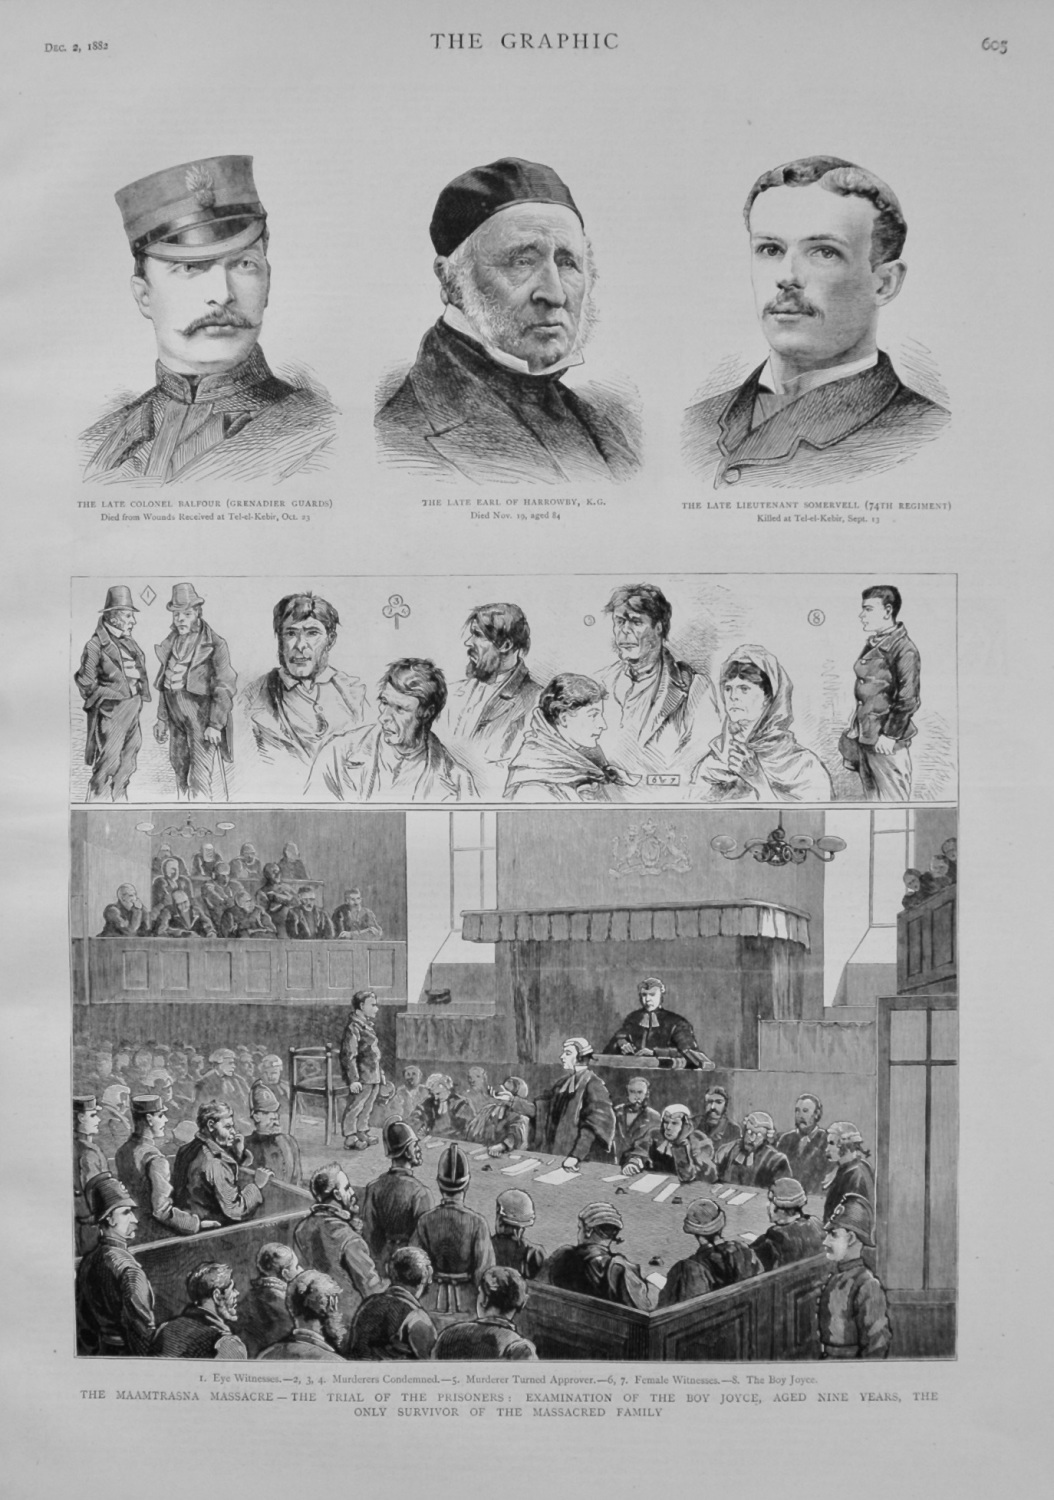 The Maamtrasna Massacre - The Trial of the Prisoners : Examination of the B